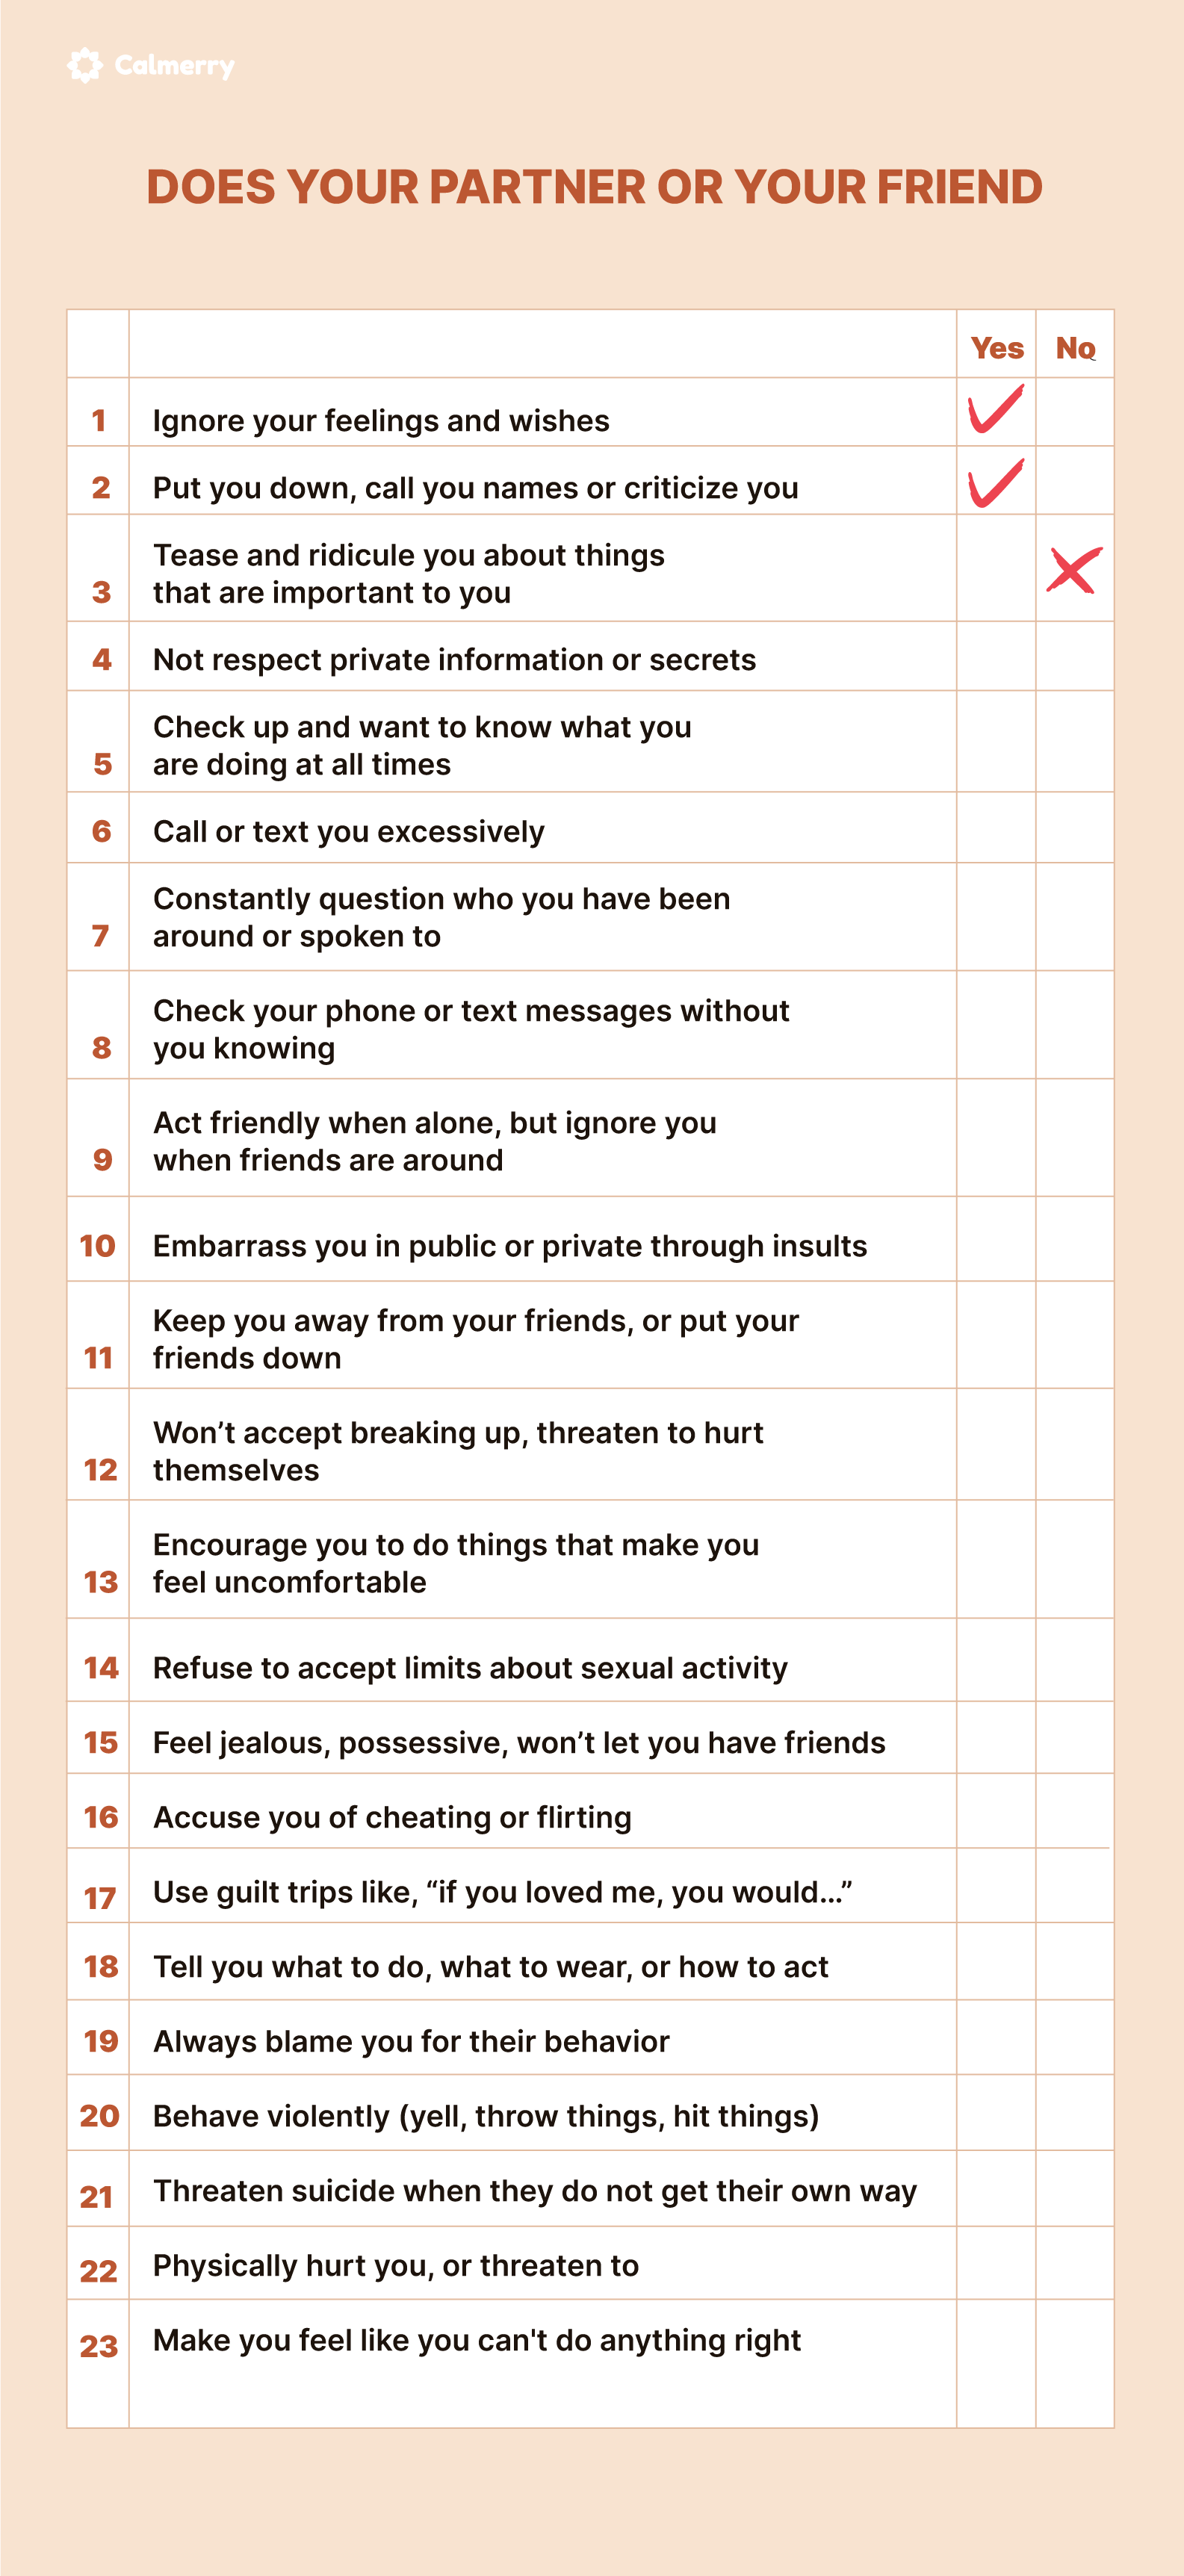 signs of an unhealthy relationship pdf